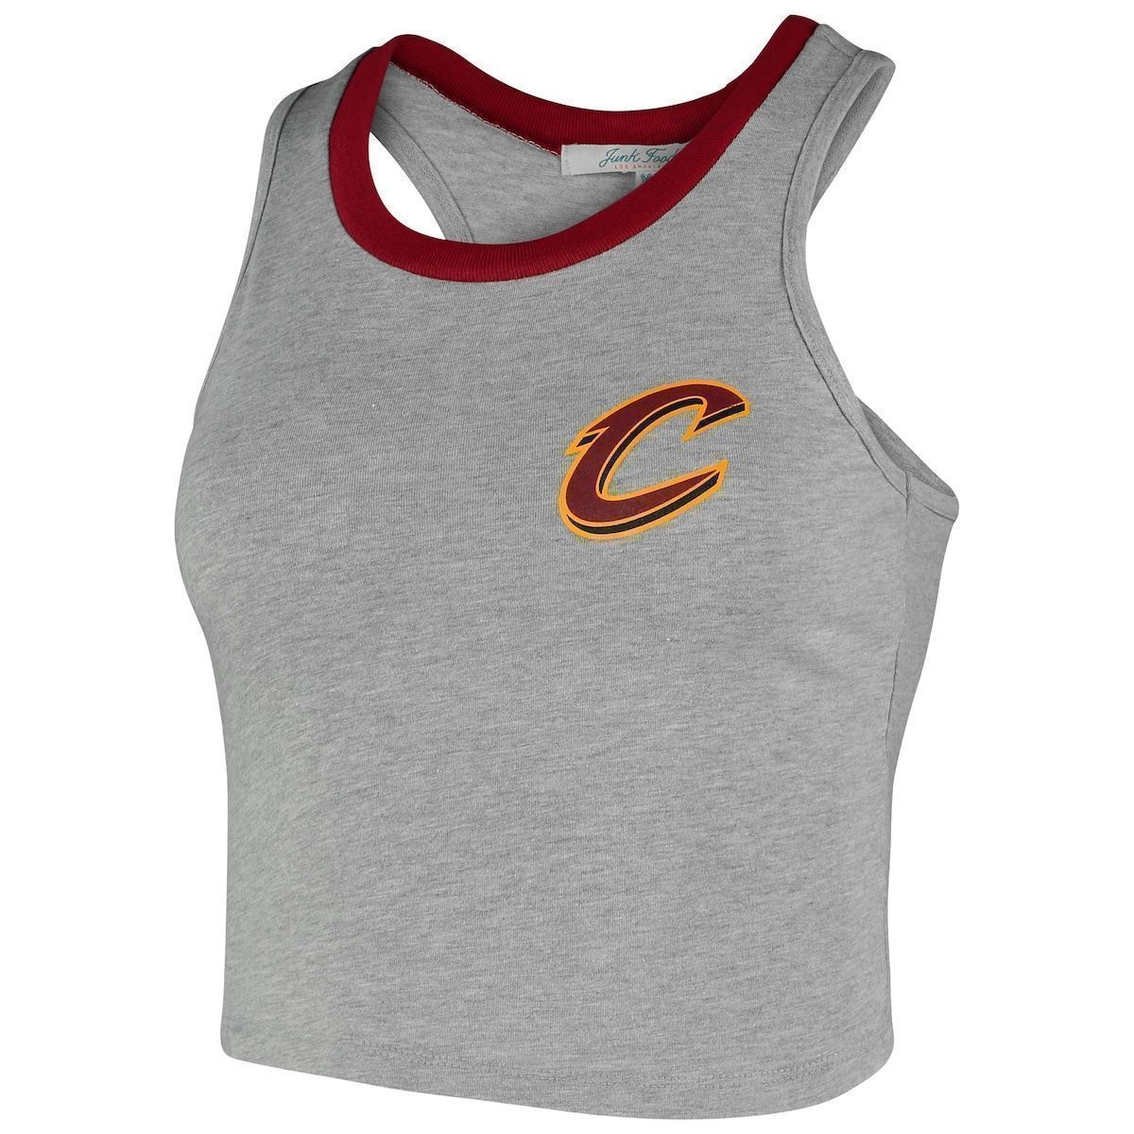 Junk Food Women's Heathered Gray Cleveland Cavaliers Taped Trim Crop Tank Top - Image 3 of 4